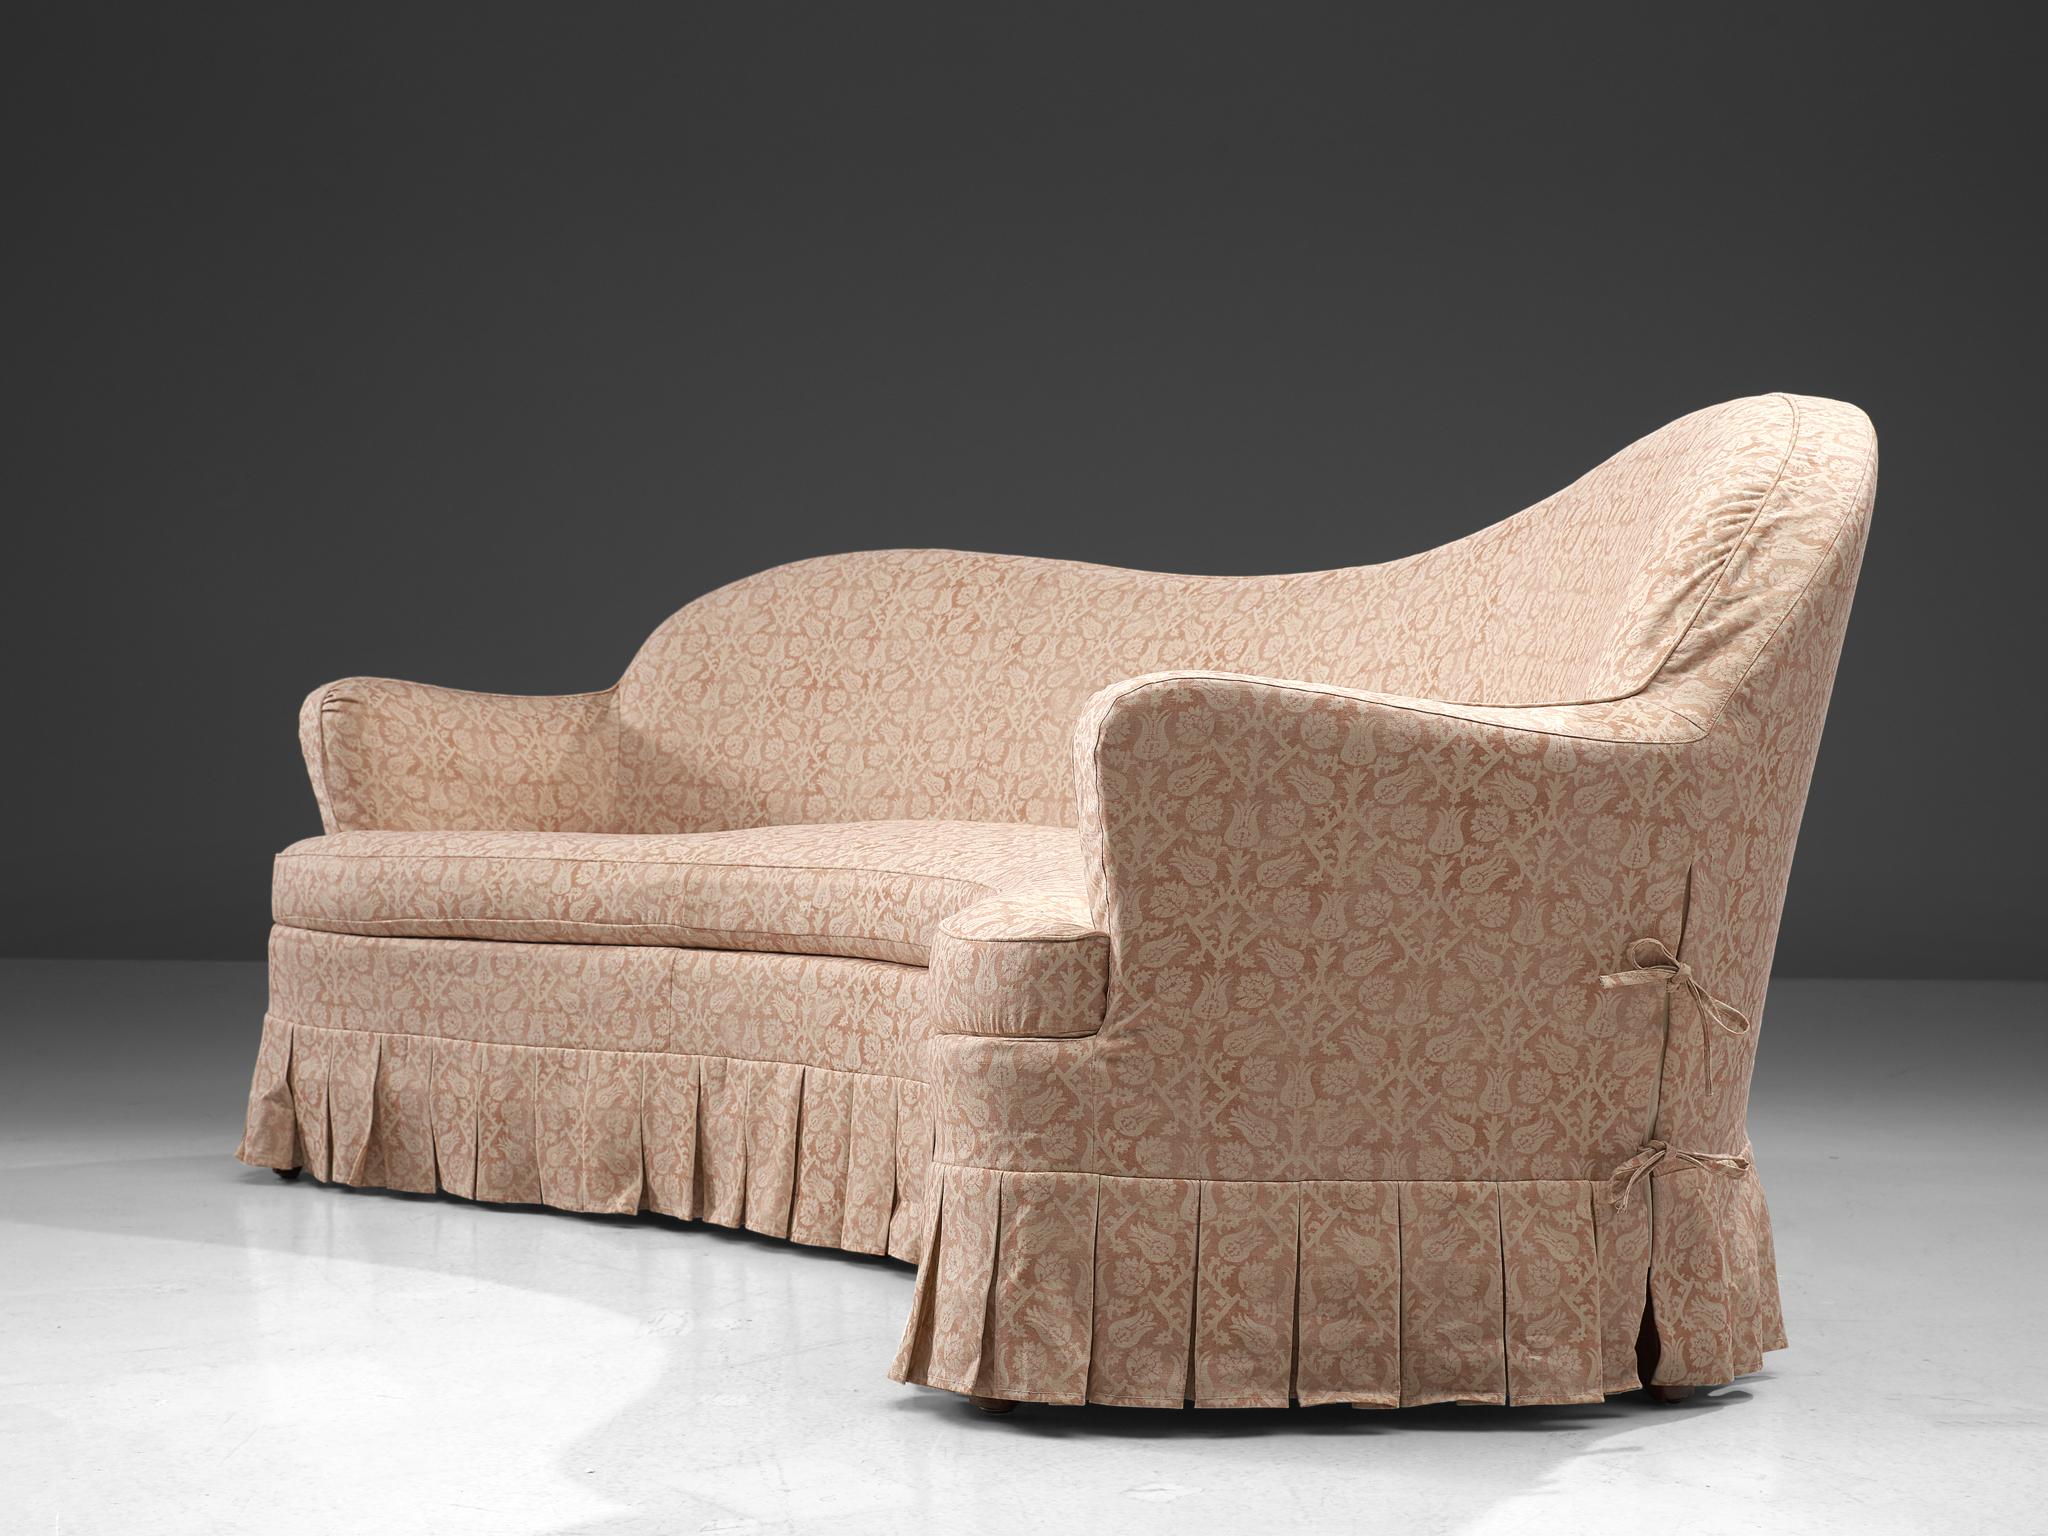 Scandinavian French Curved Sofa in ZAK+FOX ‘Fantasma’ Collection 2020 Upholstery